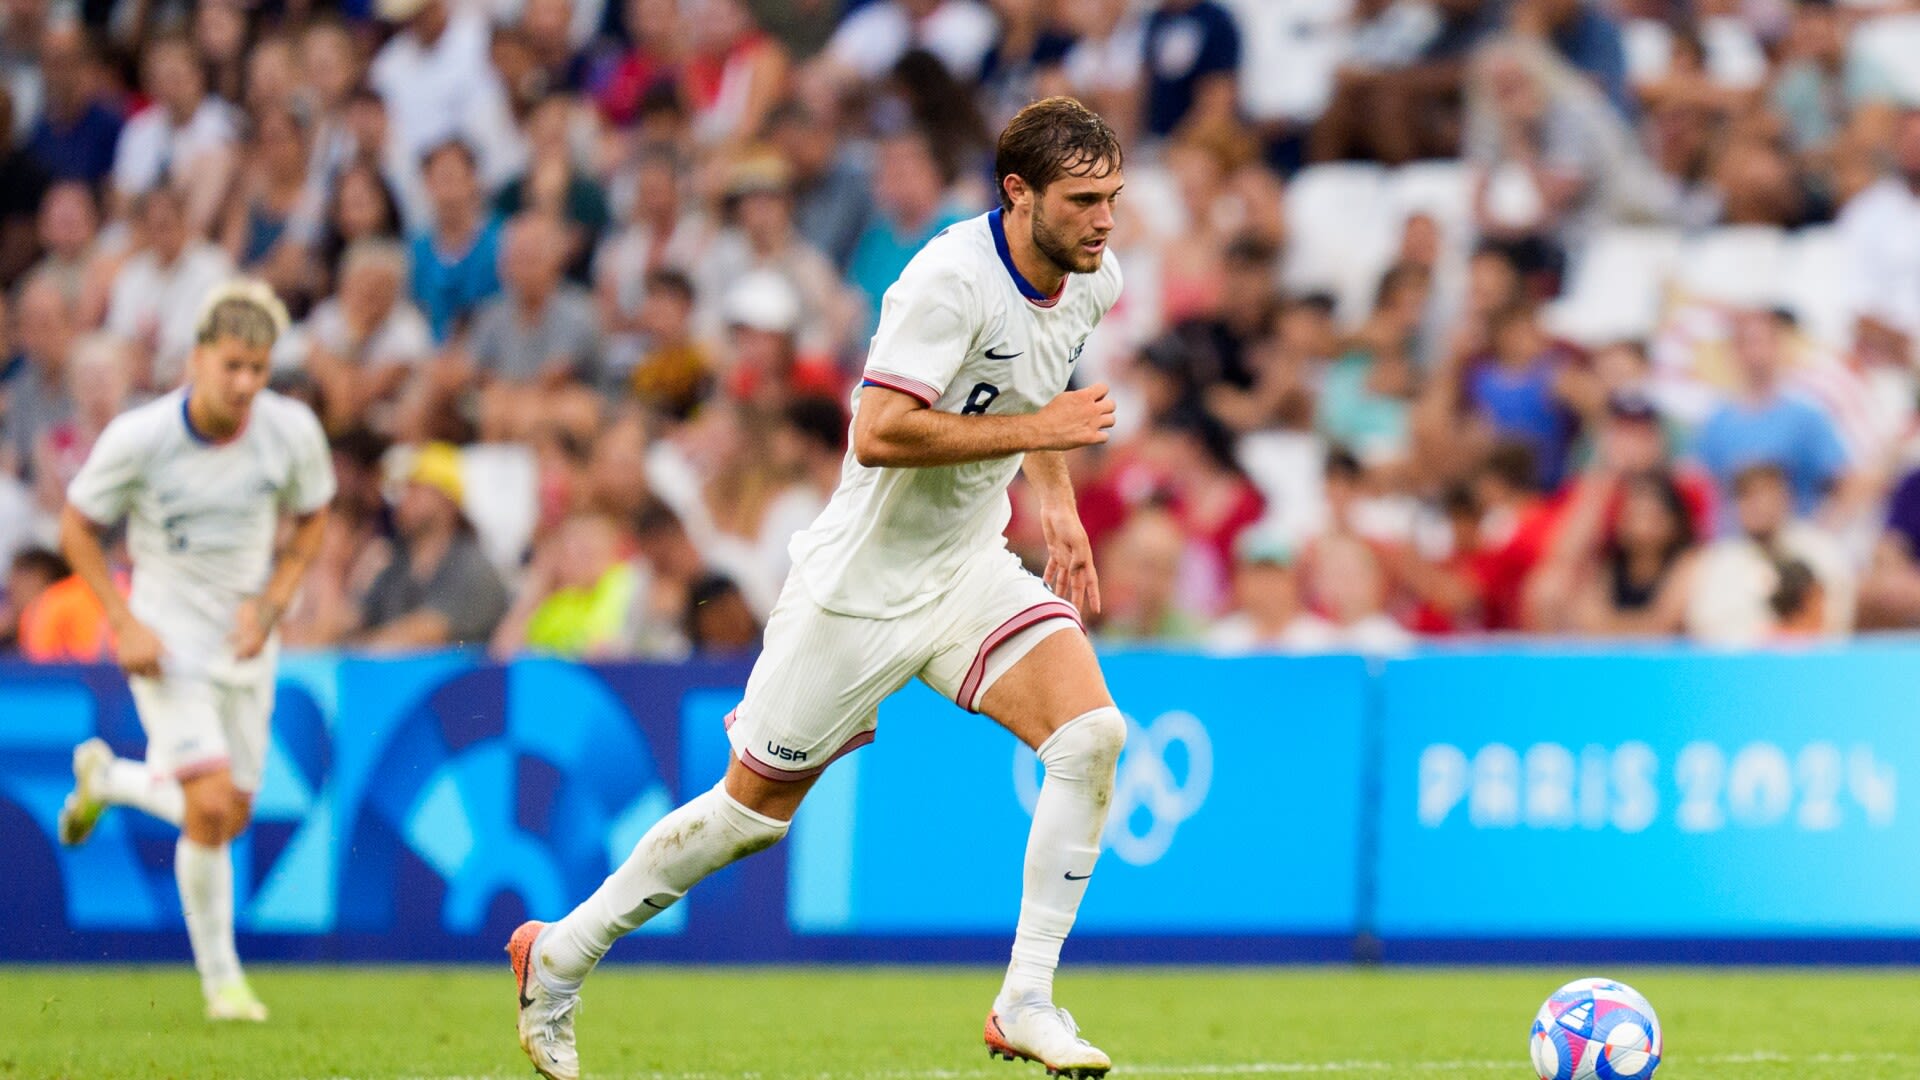 USA men's soccer vs Guinea: How to watch, stream link, team news, prediction for key Olympic clash